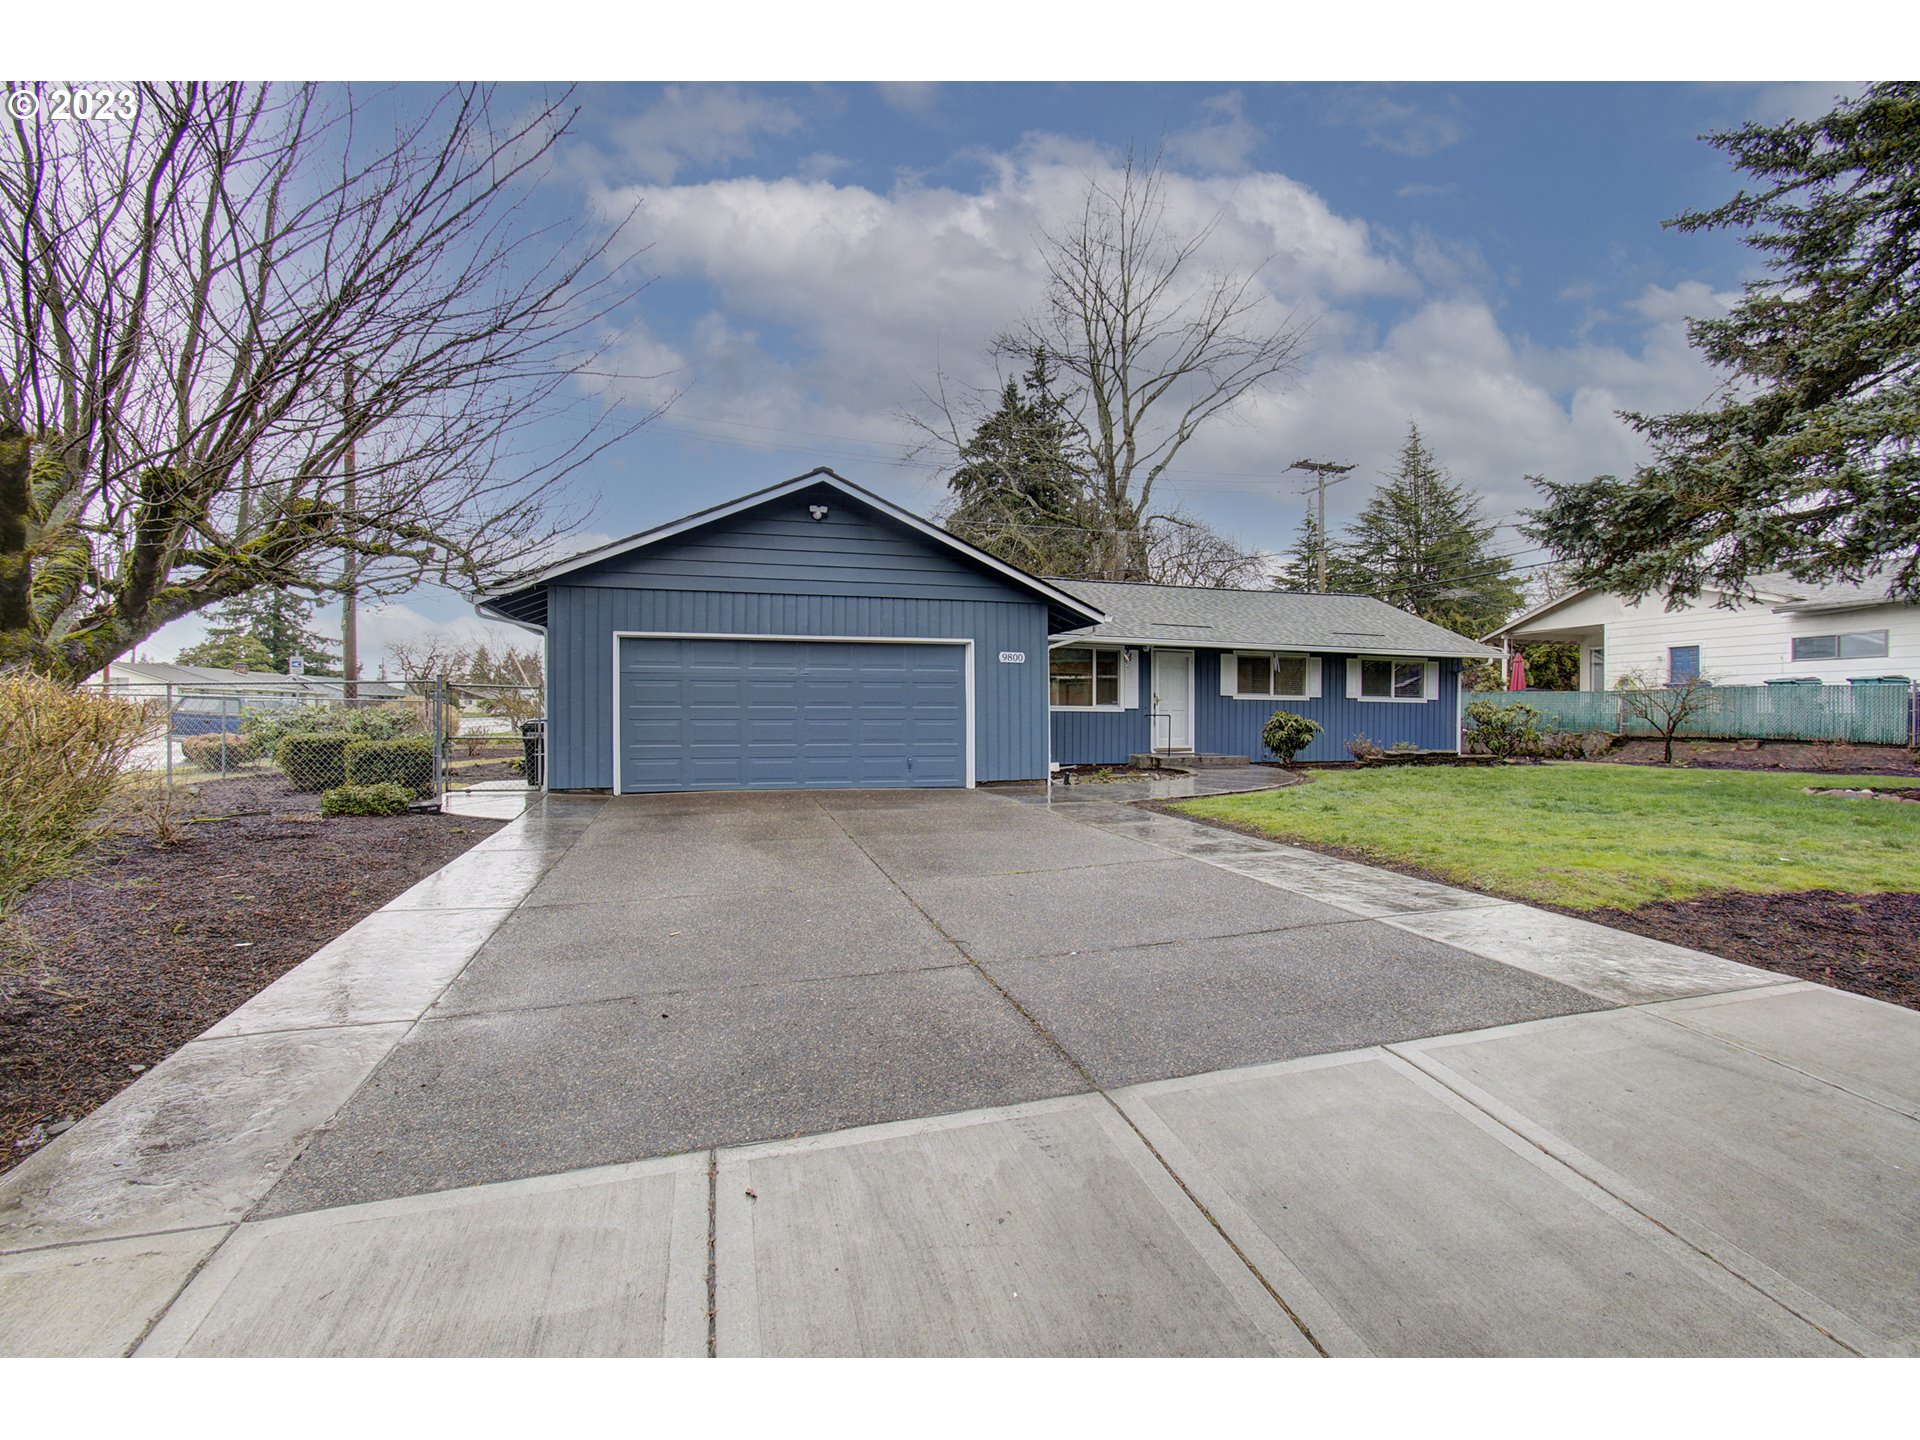 9800  St Helens Ave, Vancouver, WA 98664